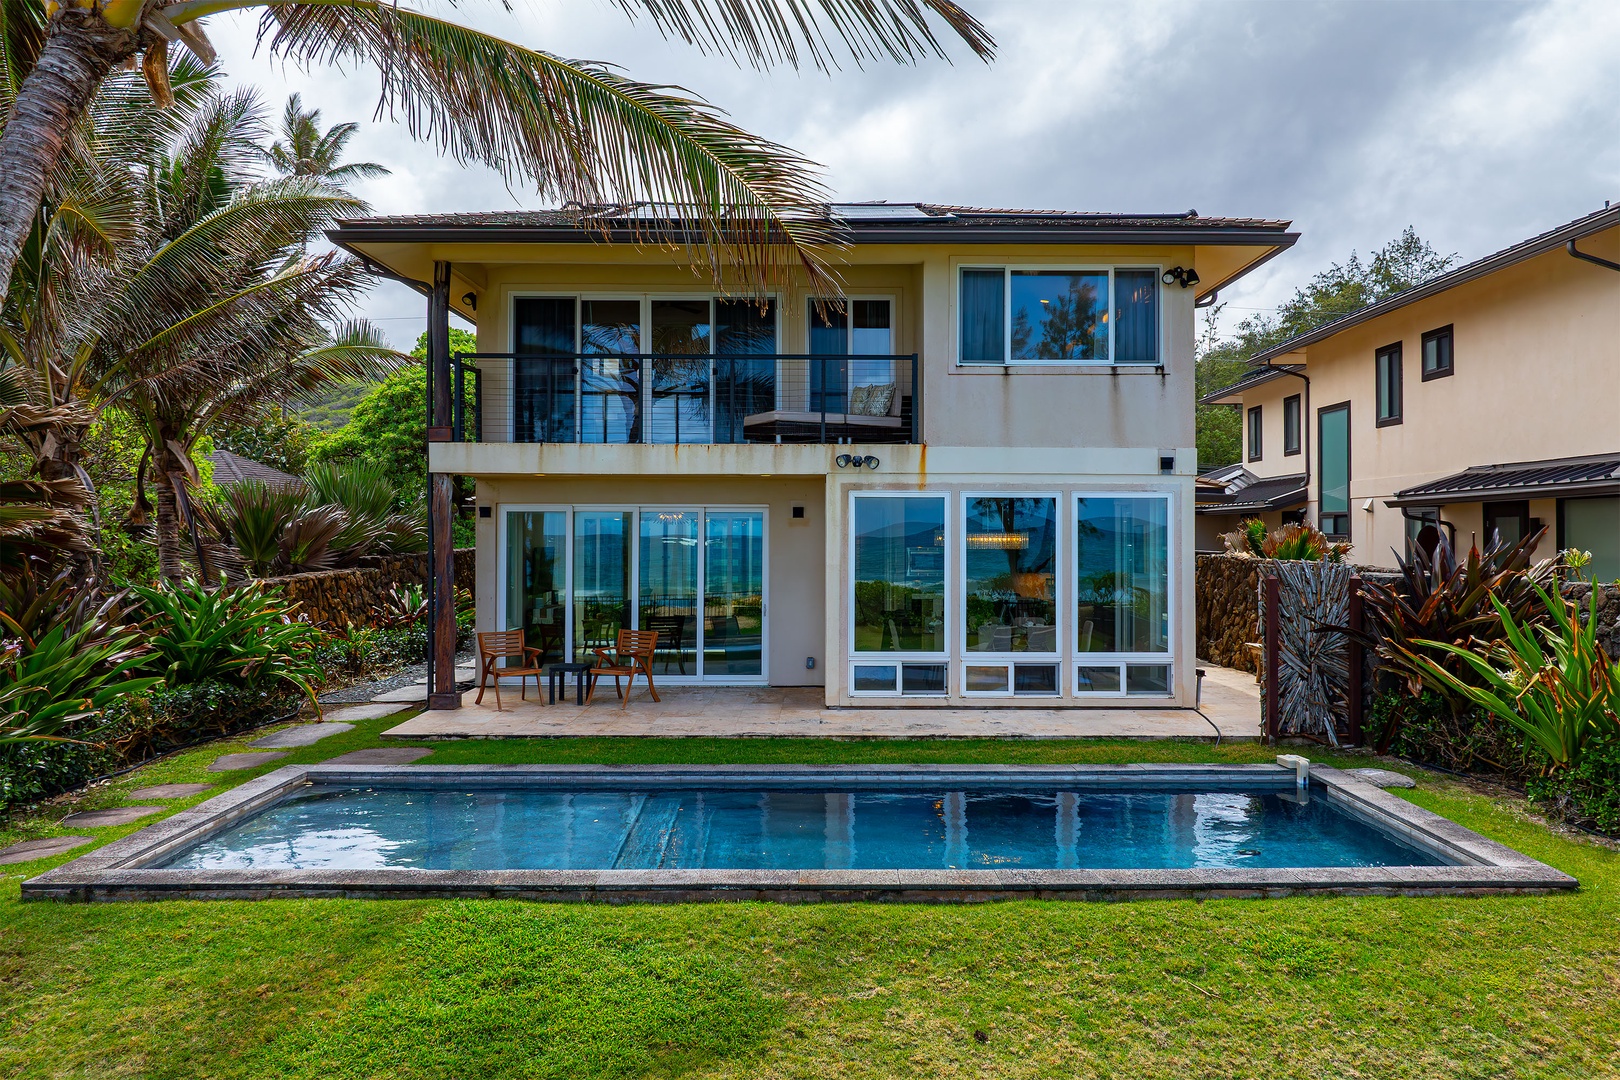 Laie Vacation Rentals, Laie Beachfront Estate - Take a plunge in the pool.